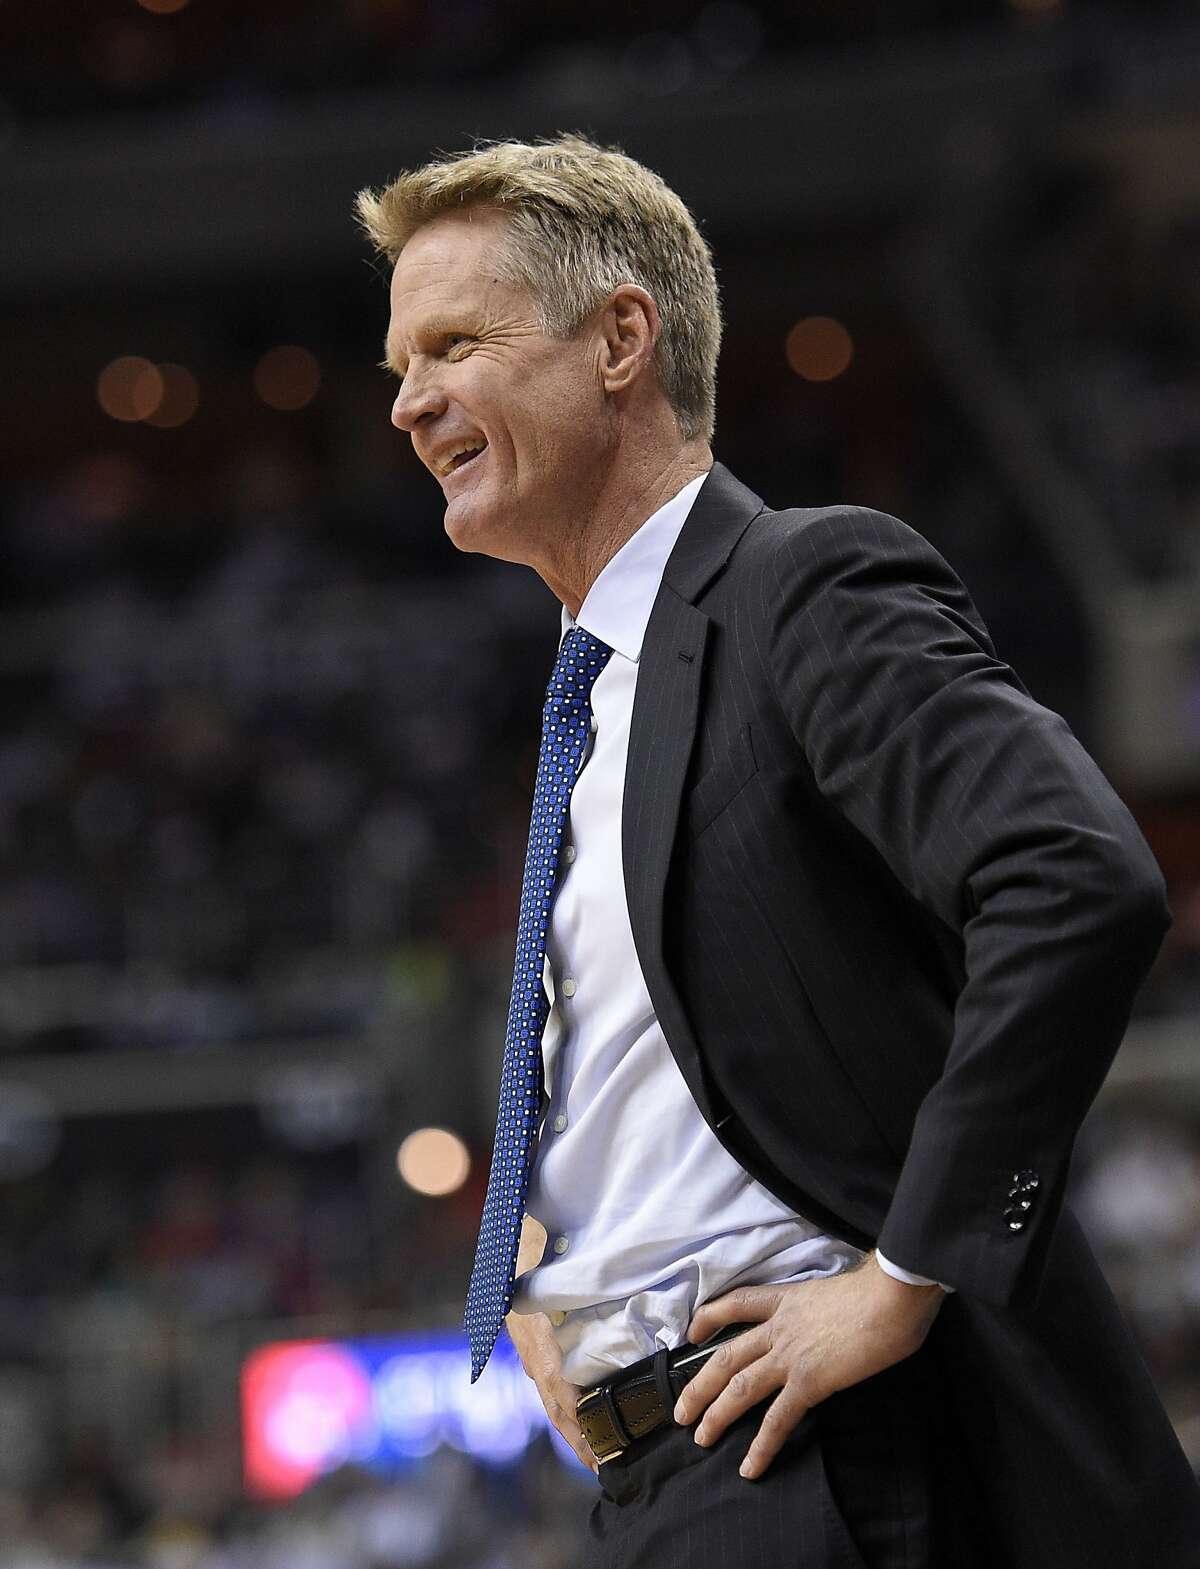 Golden State Warriors head coach Steve Kerr reacts during the second half of an NBA basketball game against the Washington Wizards, Tuesday, Feb. 28, 2017, in Washington. The Wizards won 112-108. (AP Photo/Nick Wass)